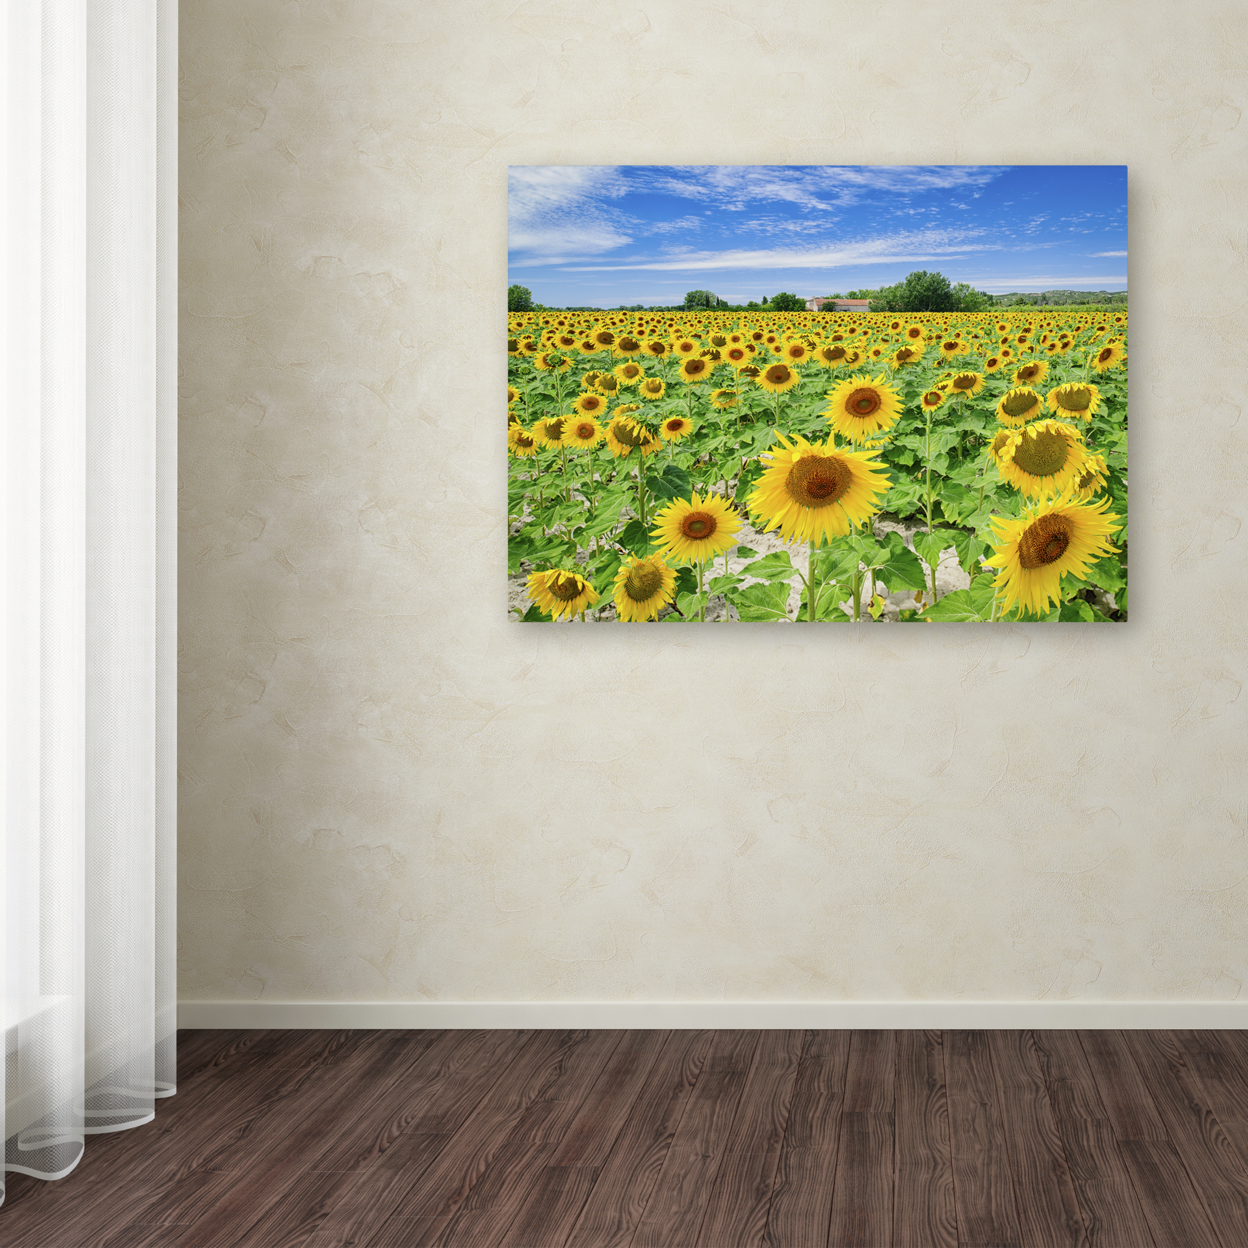 Michael Blanchette Photography 'Field Of Yellow' Canvas Wall Art 35 X 47 Inches